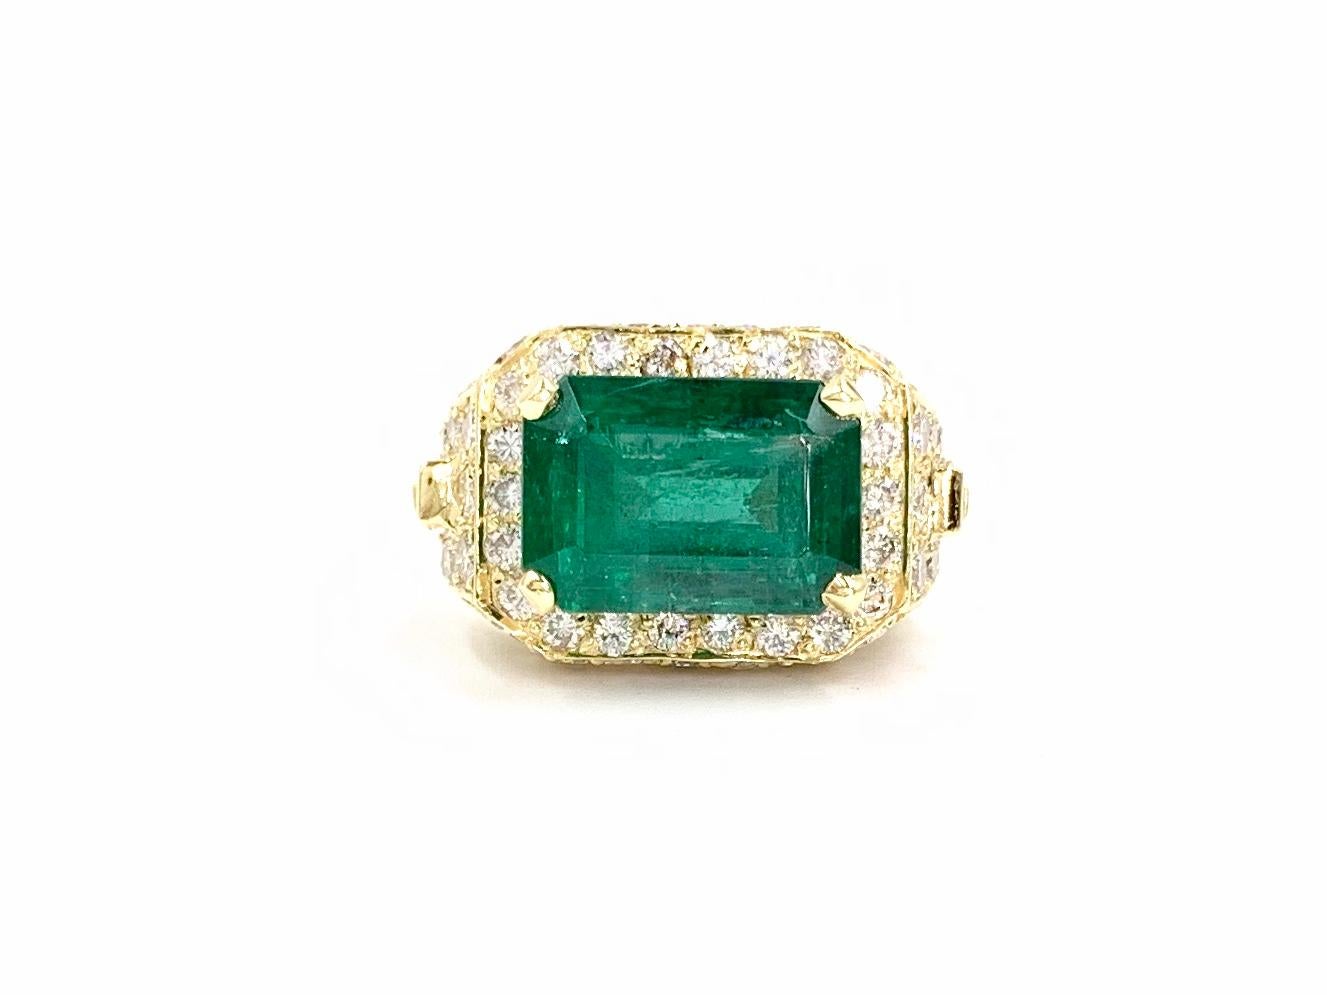 An 18 karat yellow gold 5.87 carat green Emerald cocktail ring has a modern design with a touch of Art Deco influence. The emerald cut genuine green emerald is vivid and well saturated, set horizontally for a unique look. Emerald is surrounded by